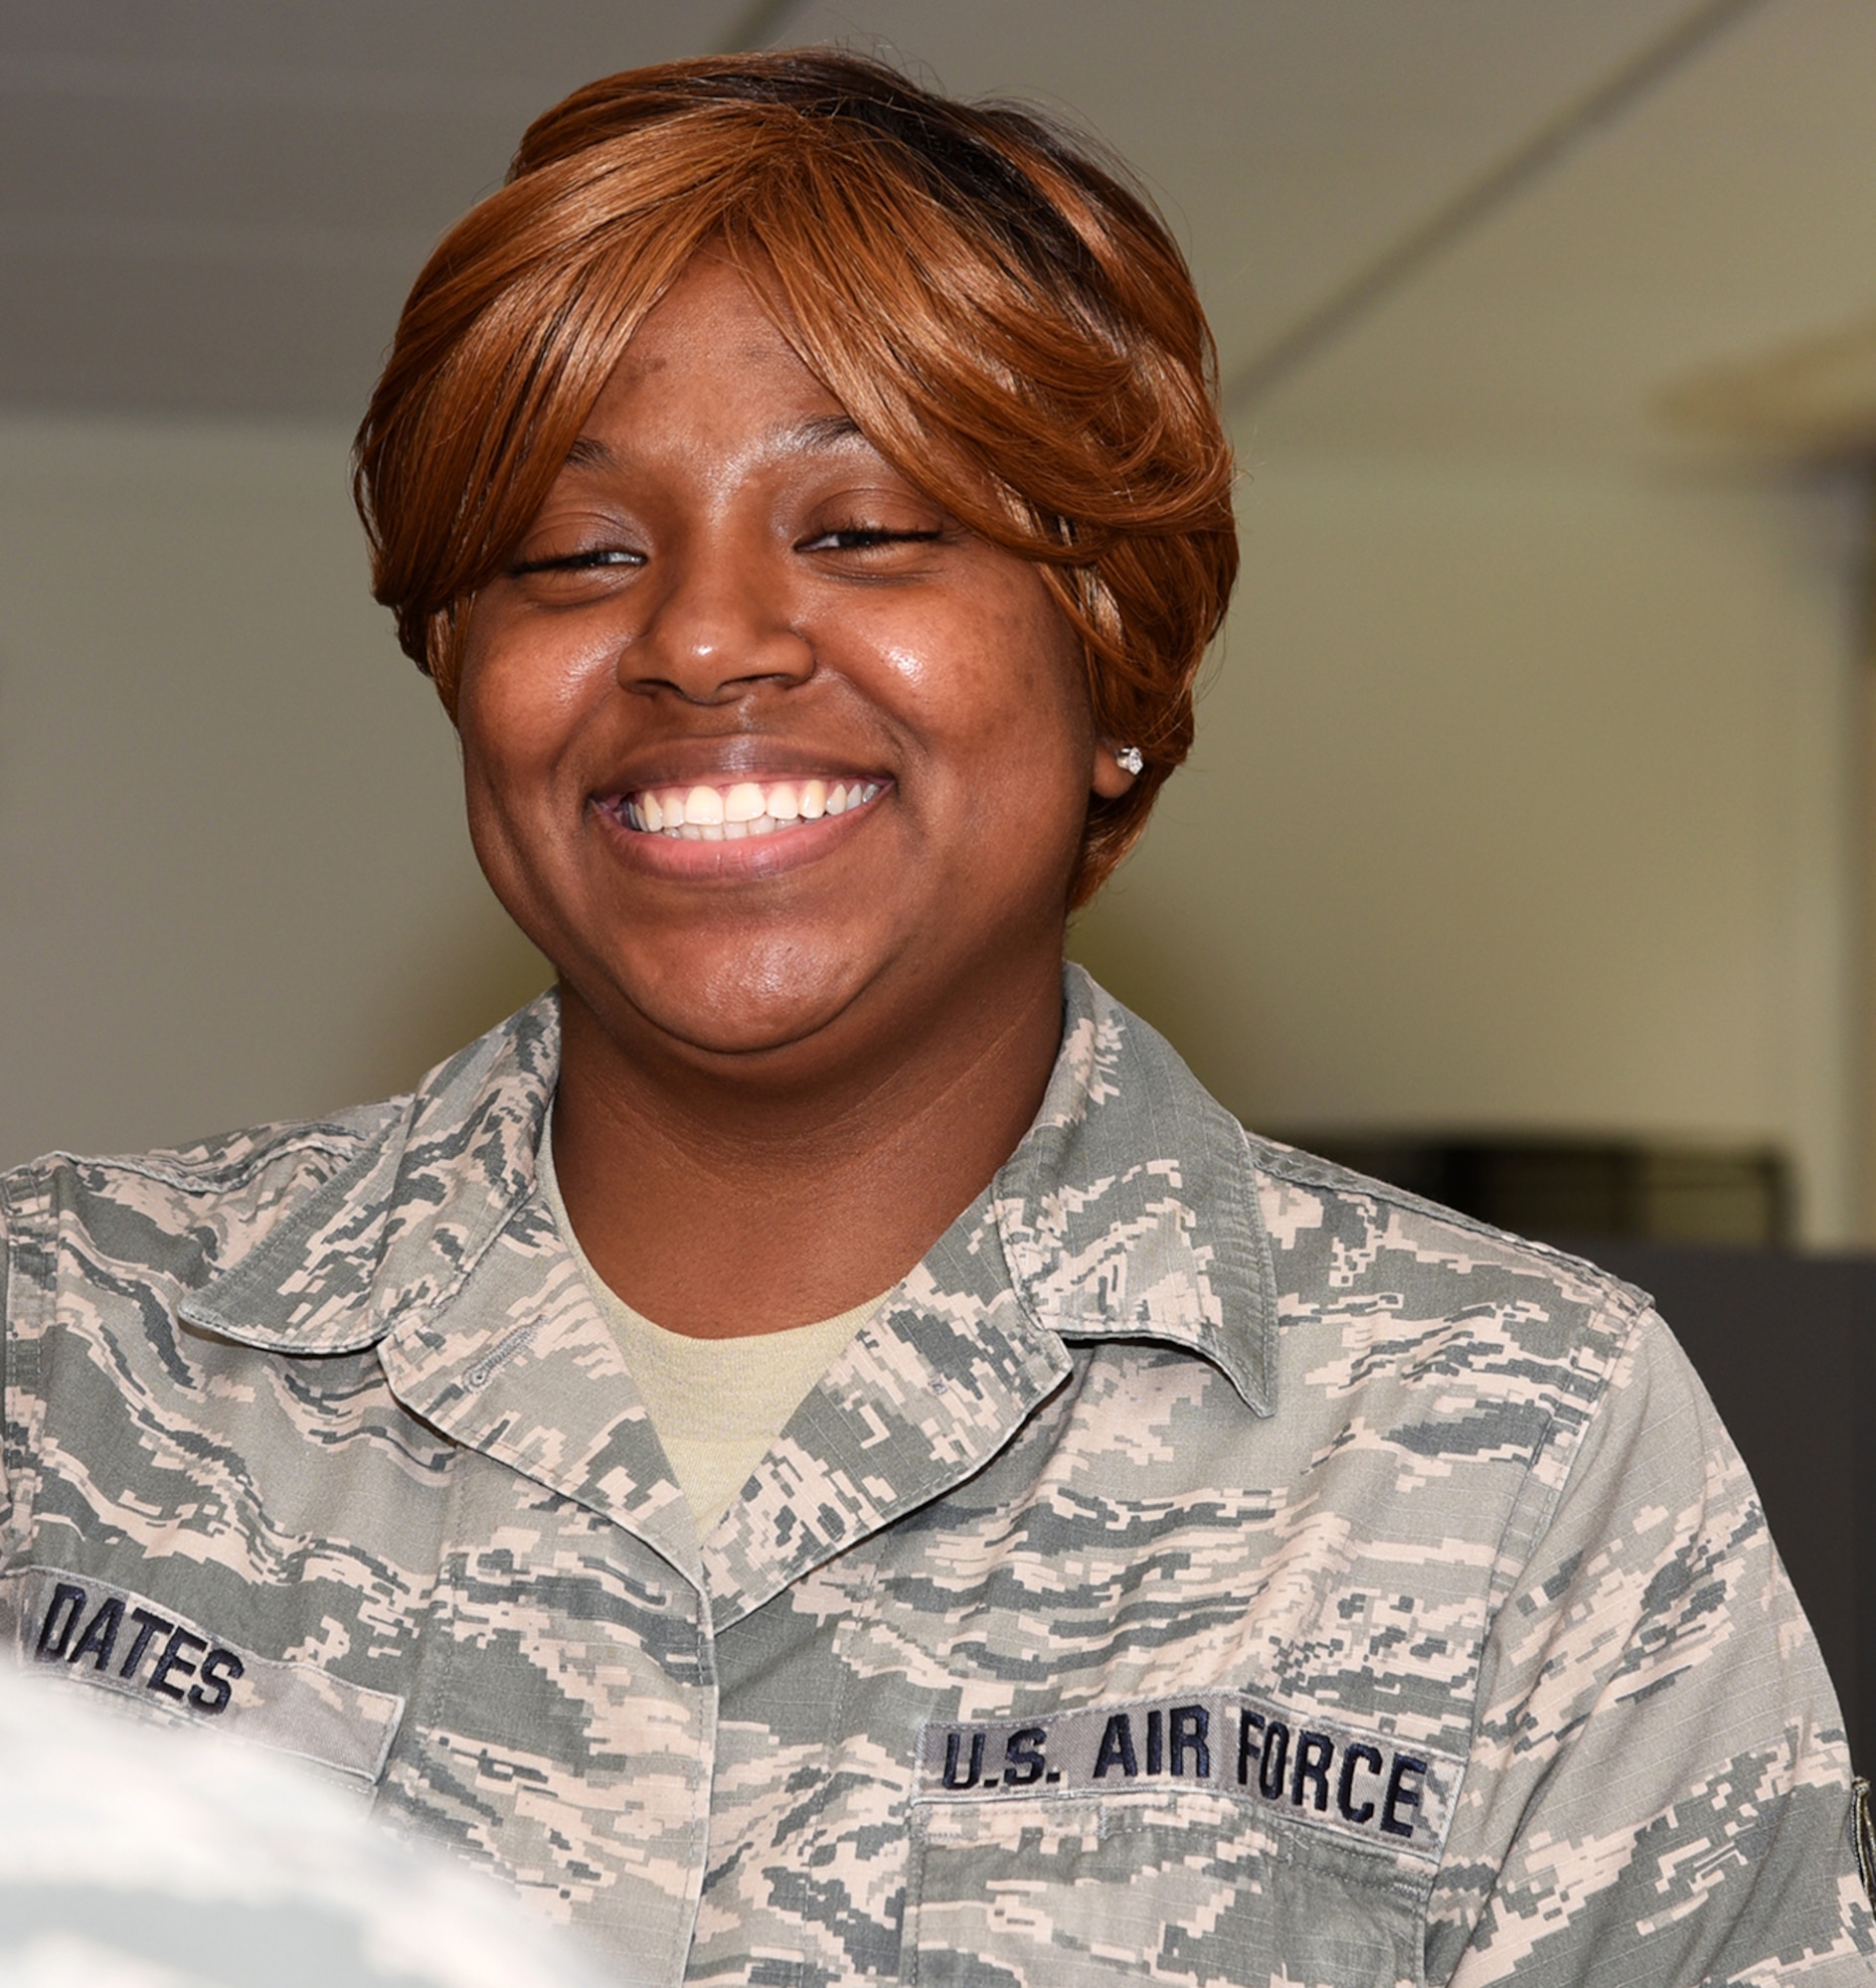 SSgt. Patricia Dates provides financial assistance to members of the 175th Wing on a daily basis Sep. 1, 2016 at Warfield Air National Guard Base, Middle River, Md. Dates is the Maryland Air National Guard September Spotlight Airman. (U.S. Air National Guard photo by Airman 1st Class Enjoli Saunders/RELEASED)
